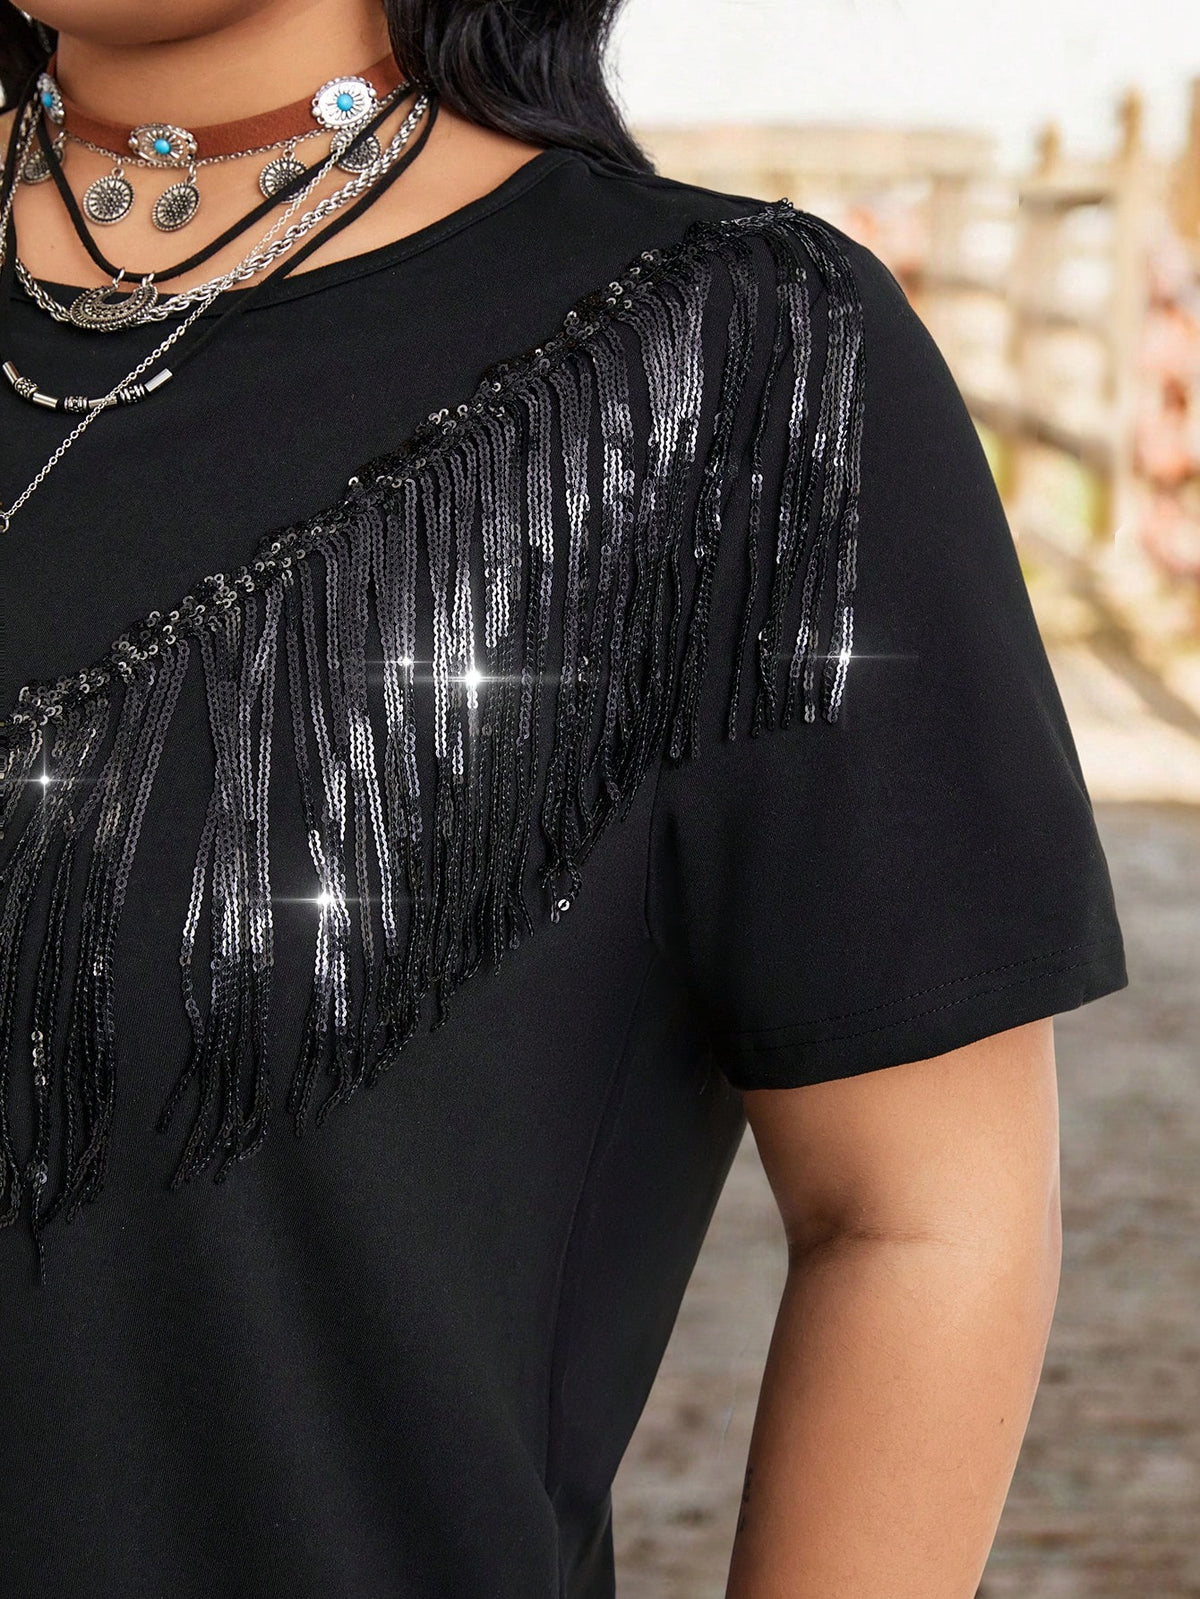 LUNE Plus Size Music Festival Party Western Casual Fashion T-Shirt With Fringe, Sequins, Casual Vacation T-Shirt